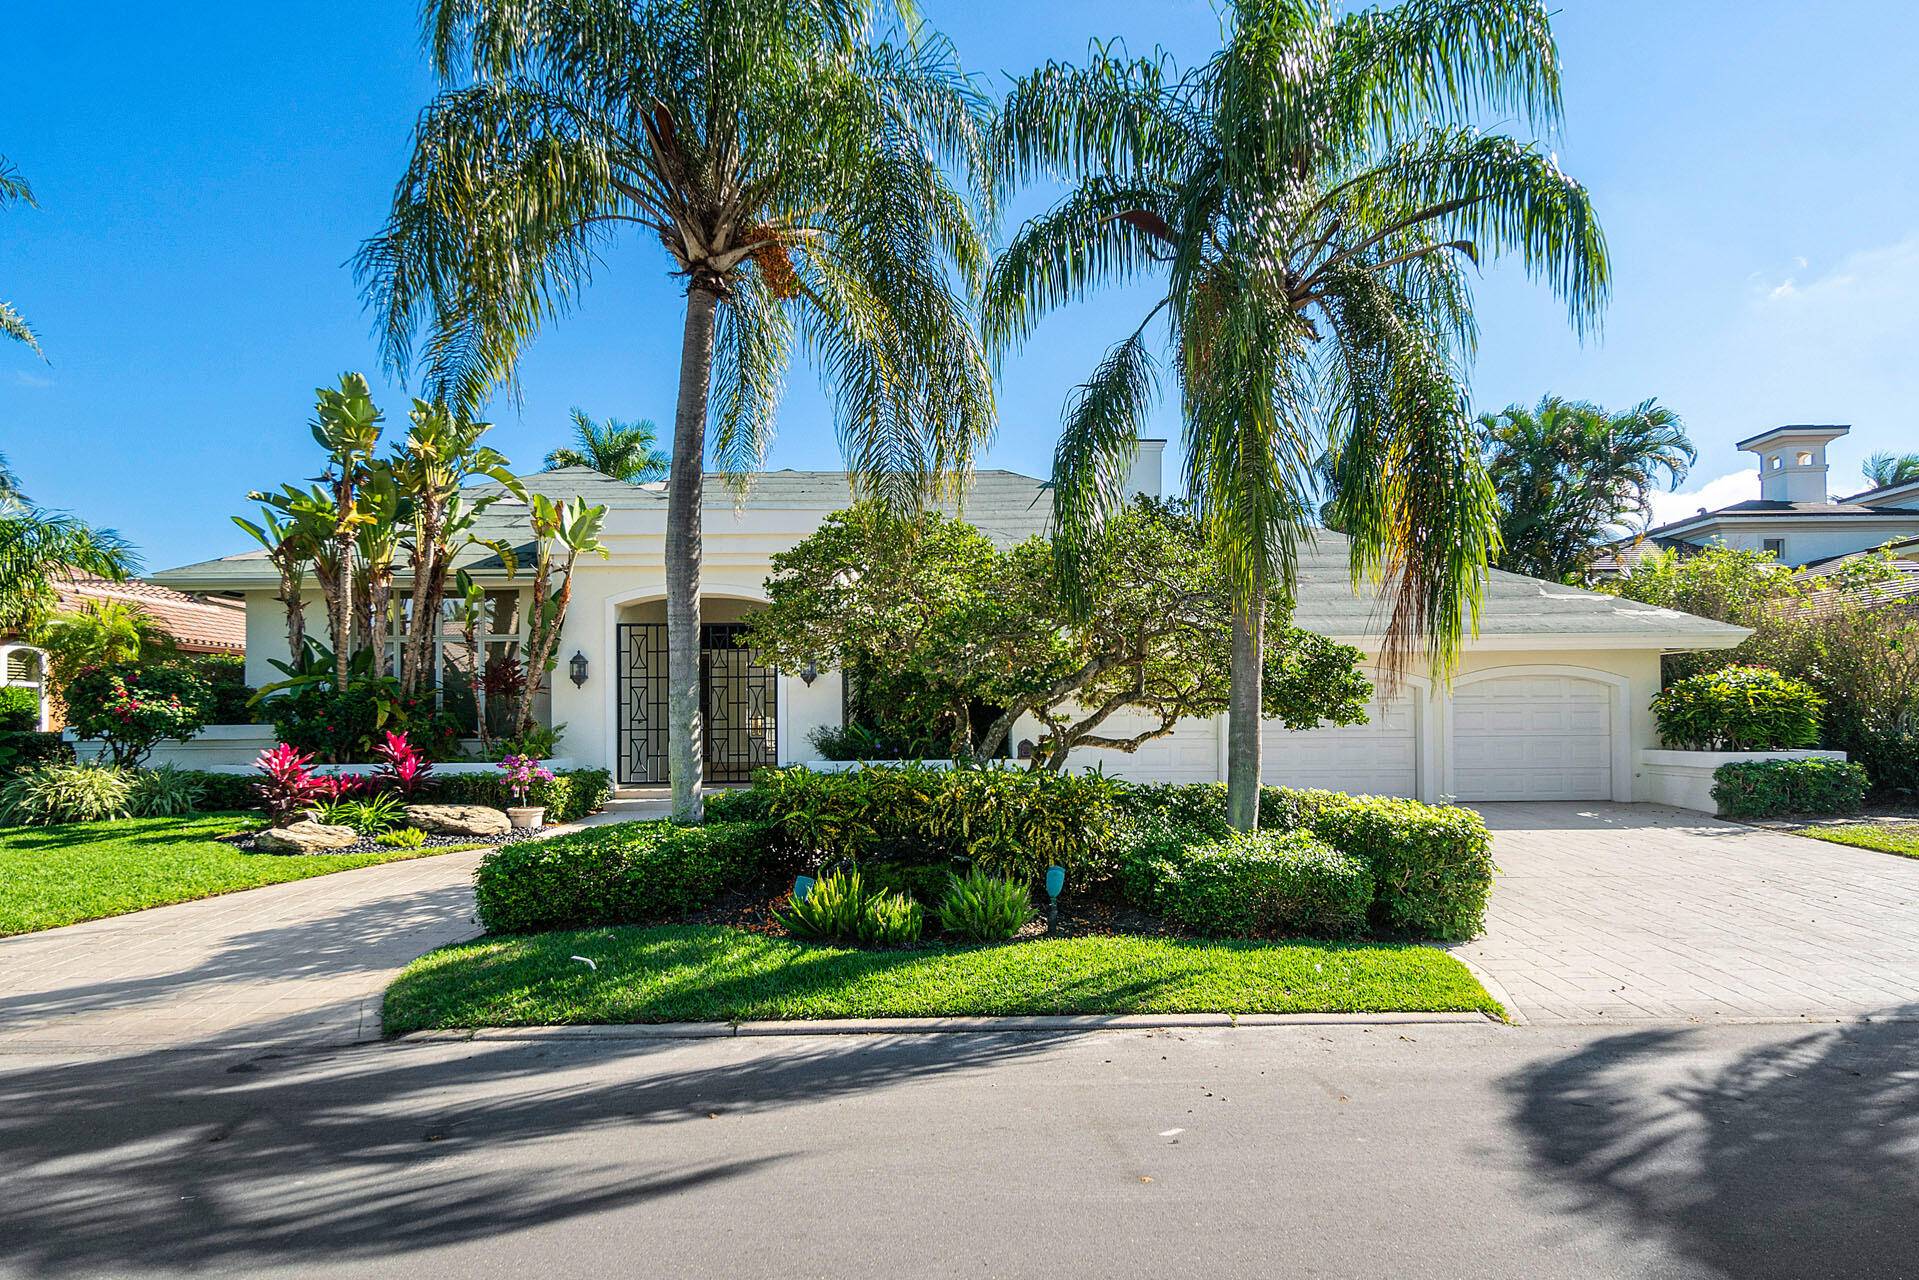 480 Alexander Palm Road is a luminous 4 bedroom waterfront estate offering 5, 080 Living SF on the intracoastal in Boca Raton's prestigious Royal Palm Yacht Country Club.